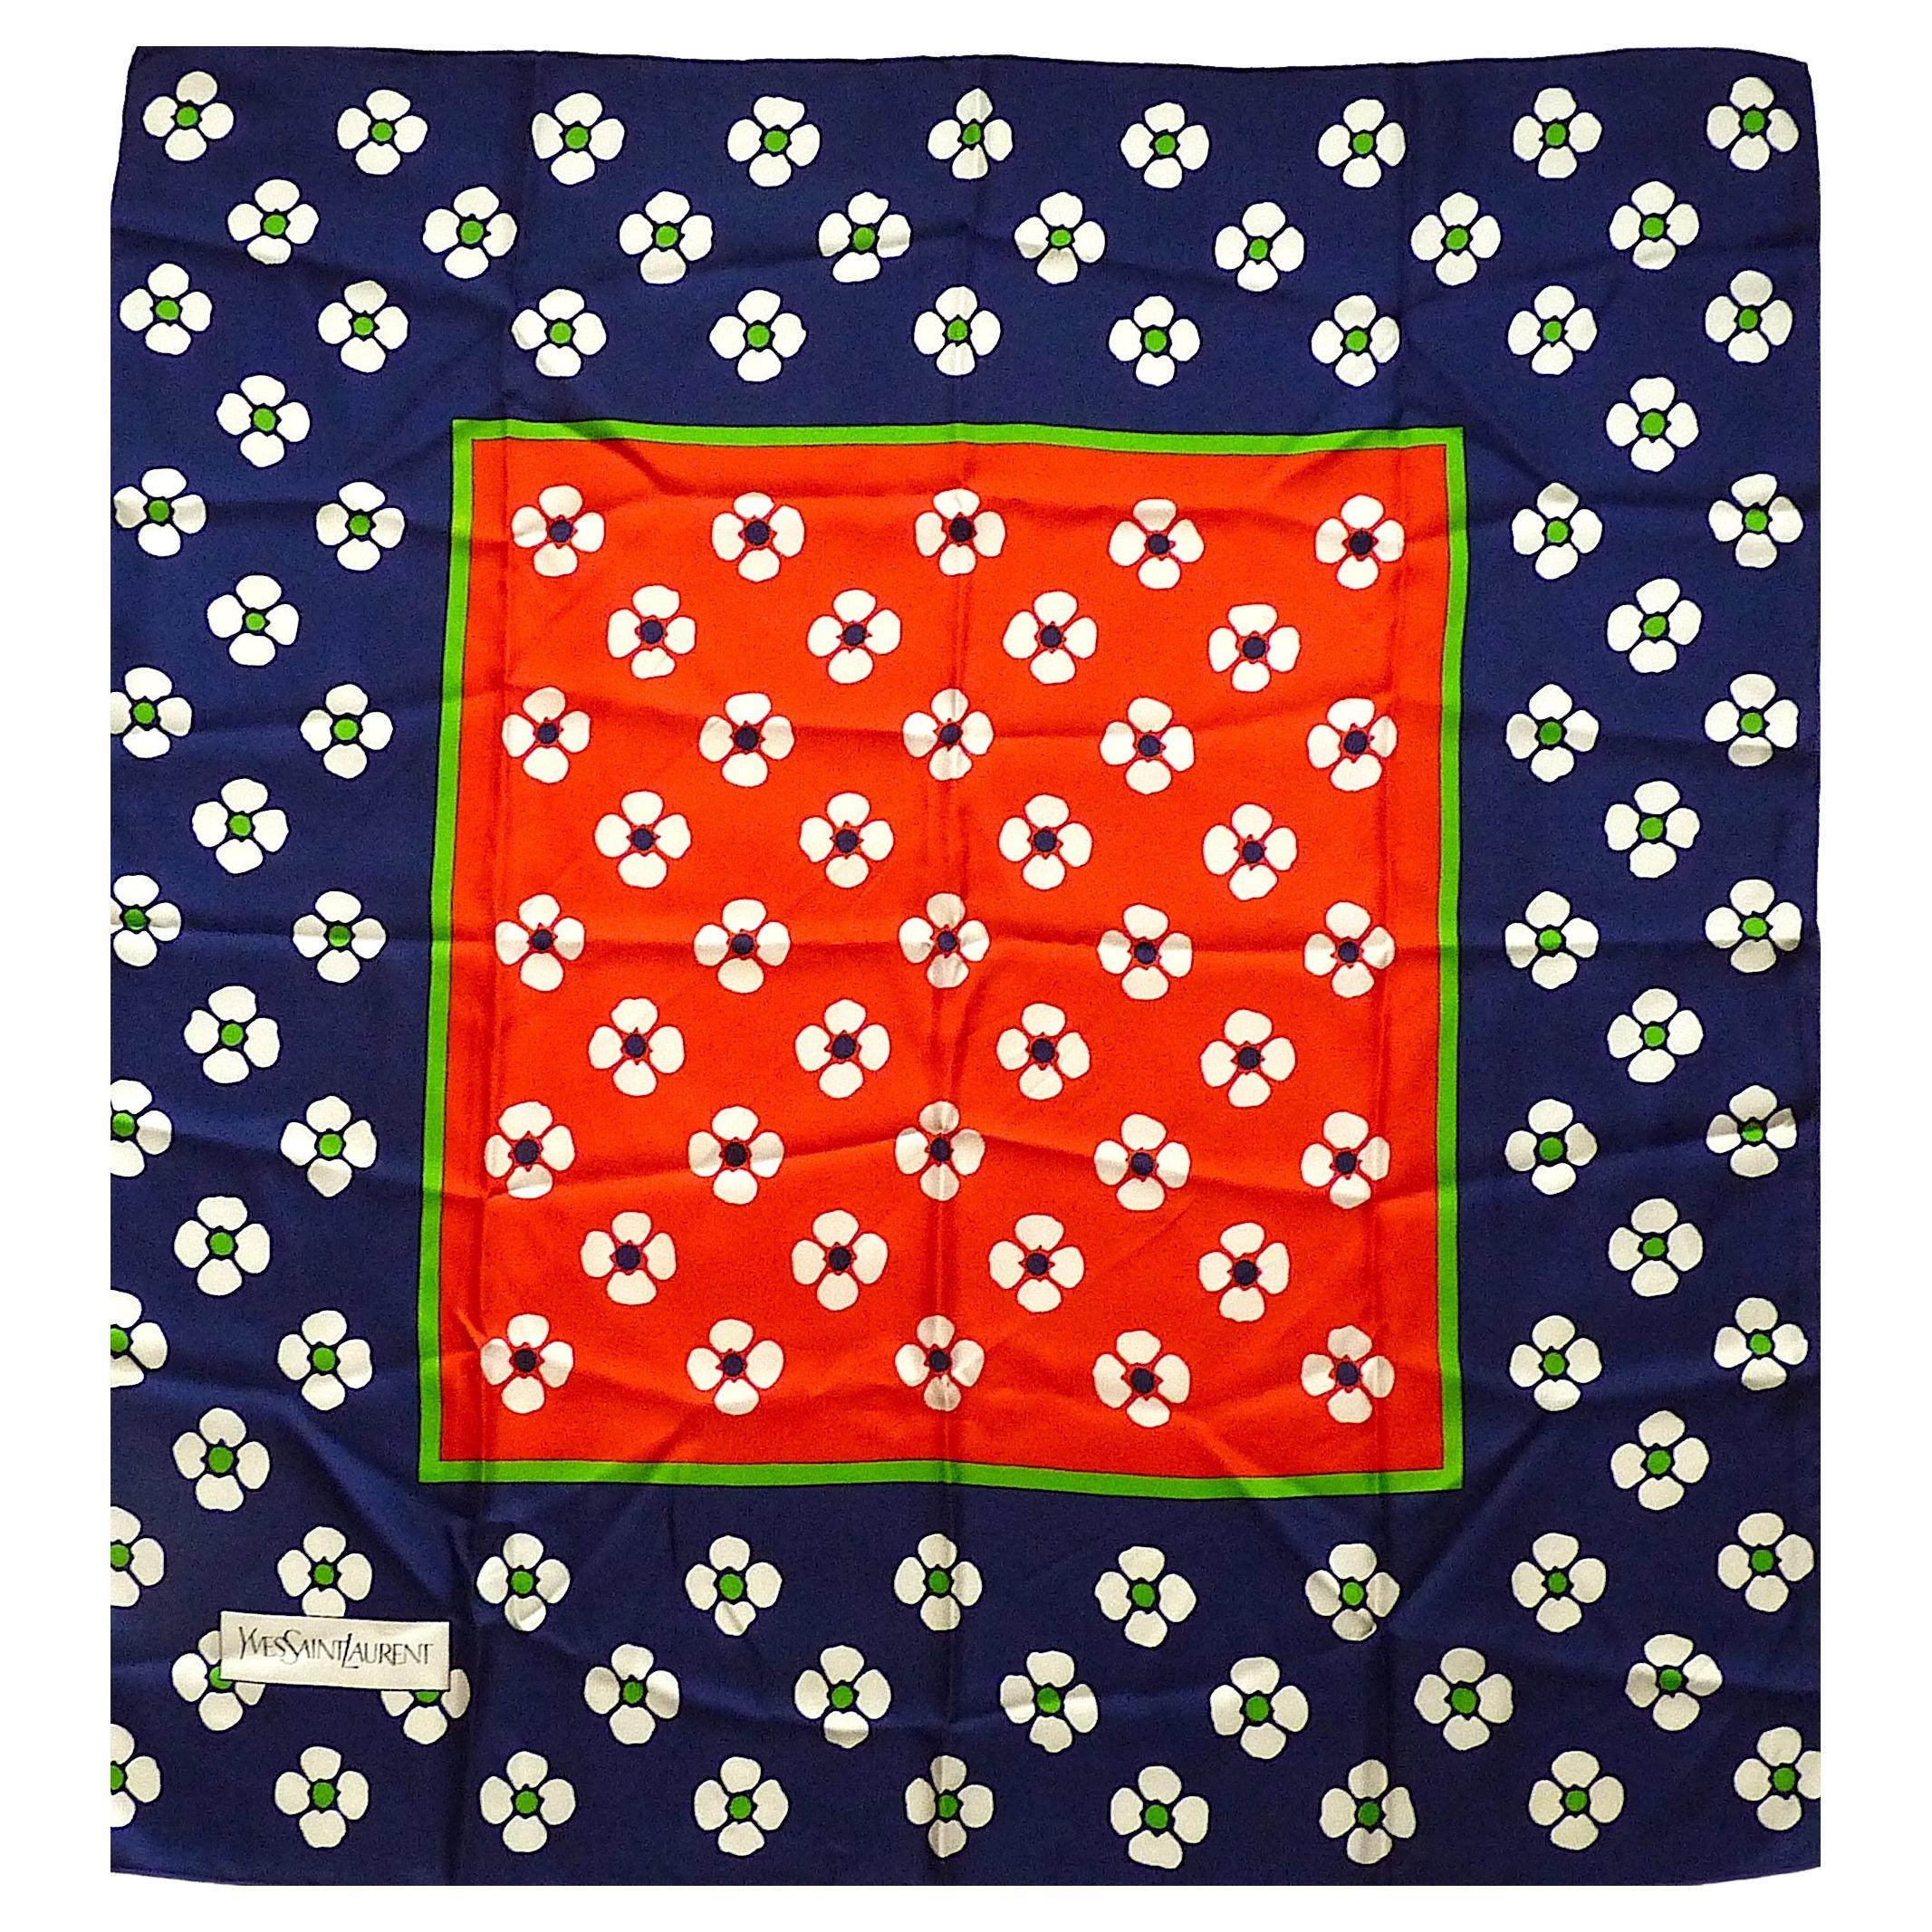 Yves Saint Laurent YSL Navy Red Green Flowers Silk Scarf from the 1970s